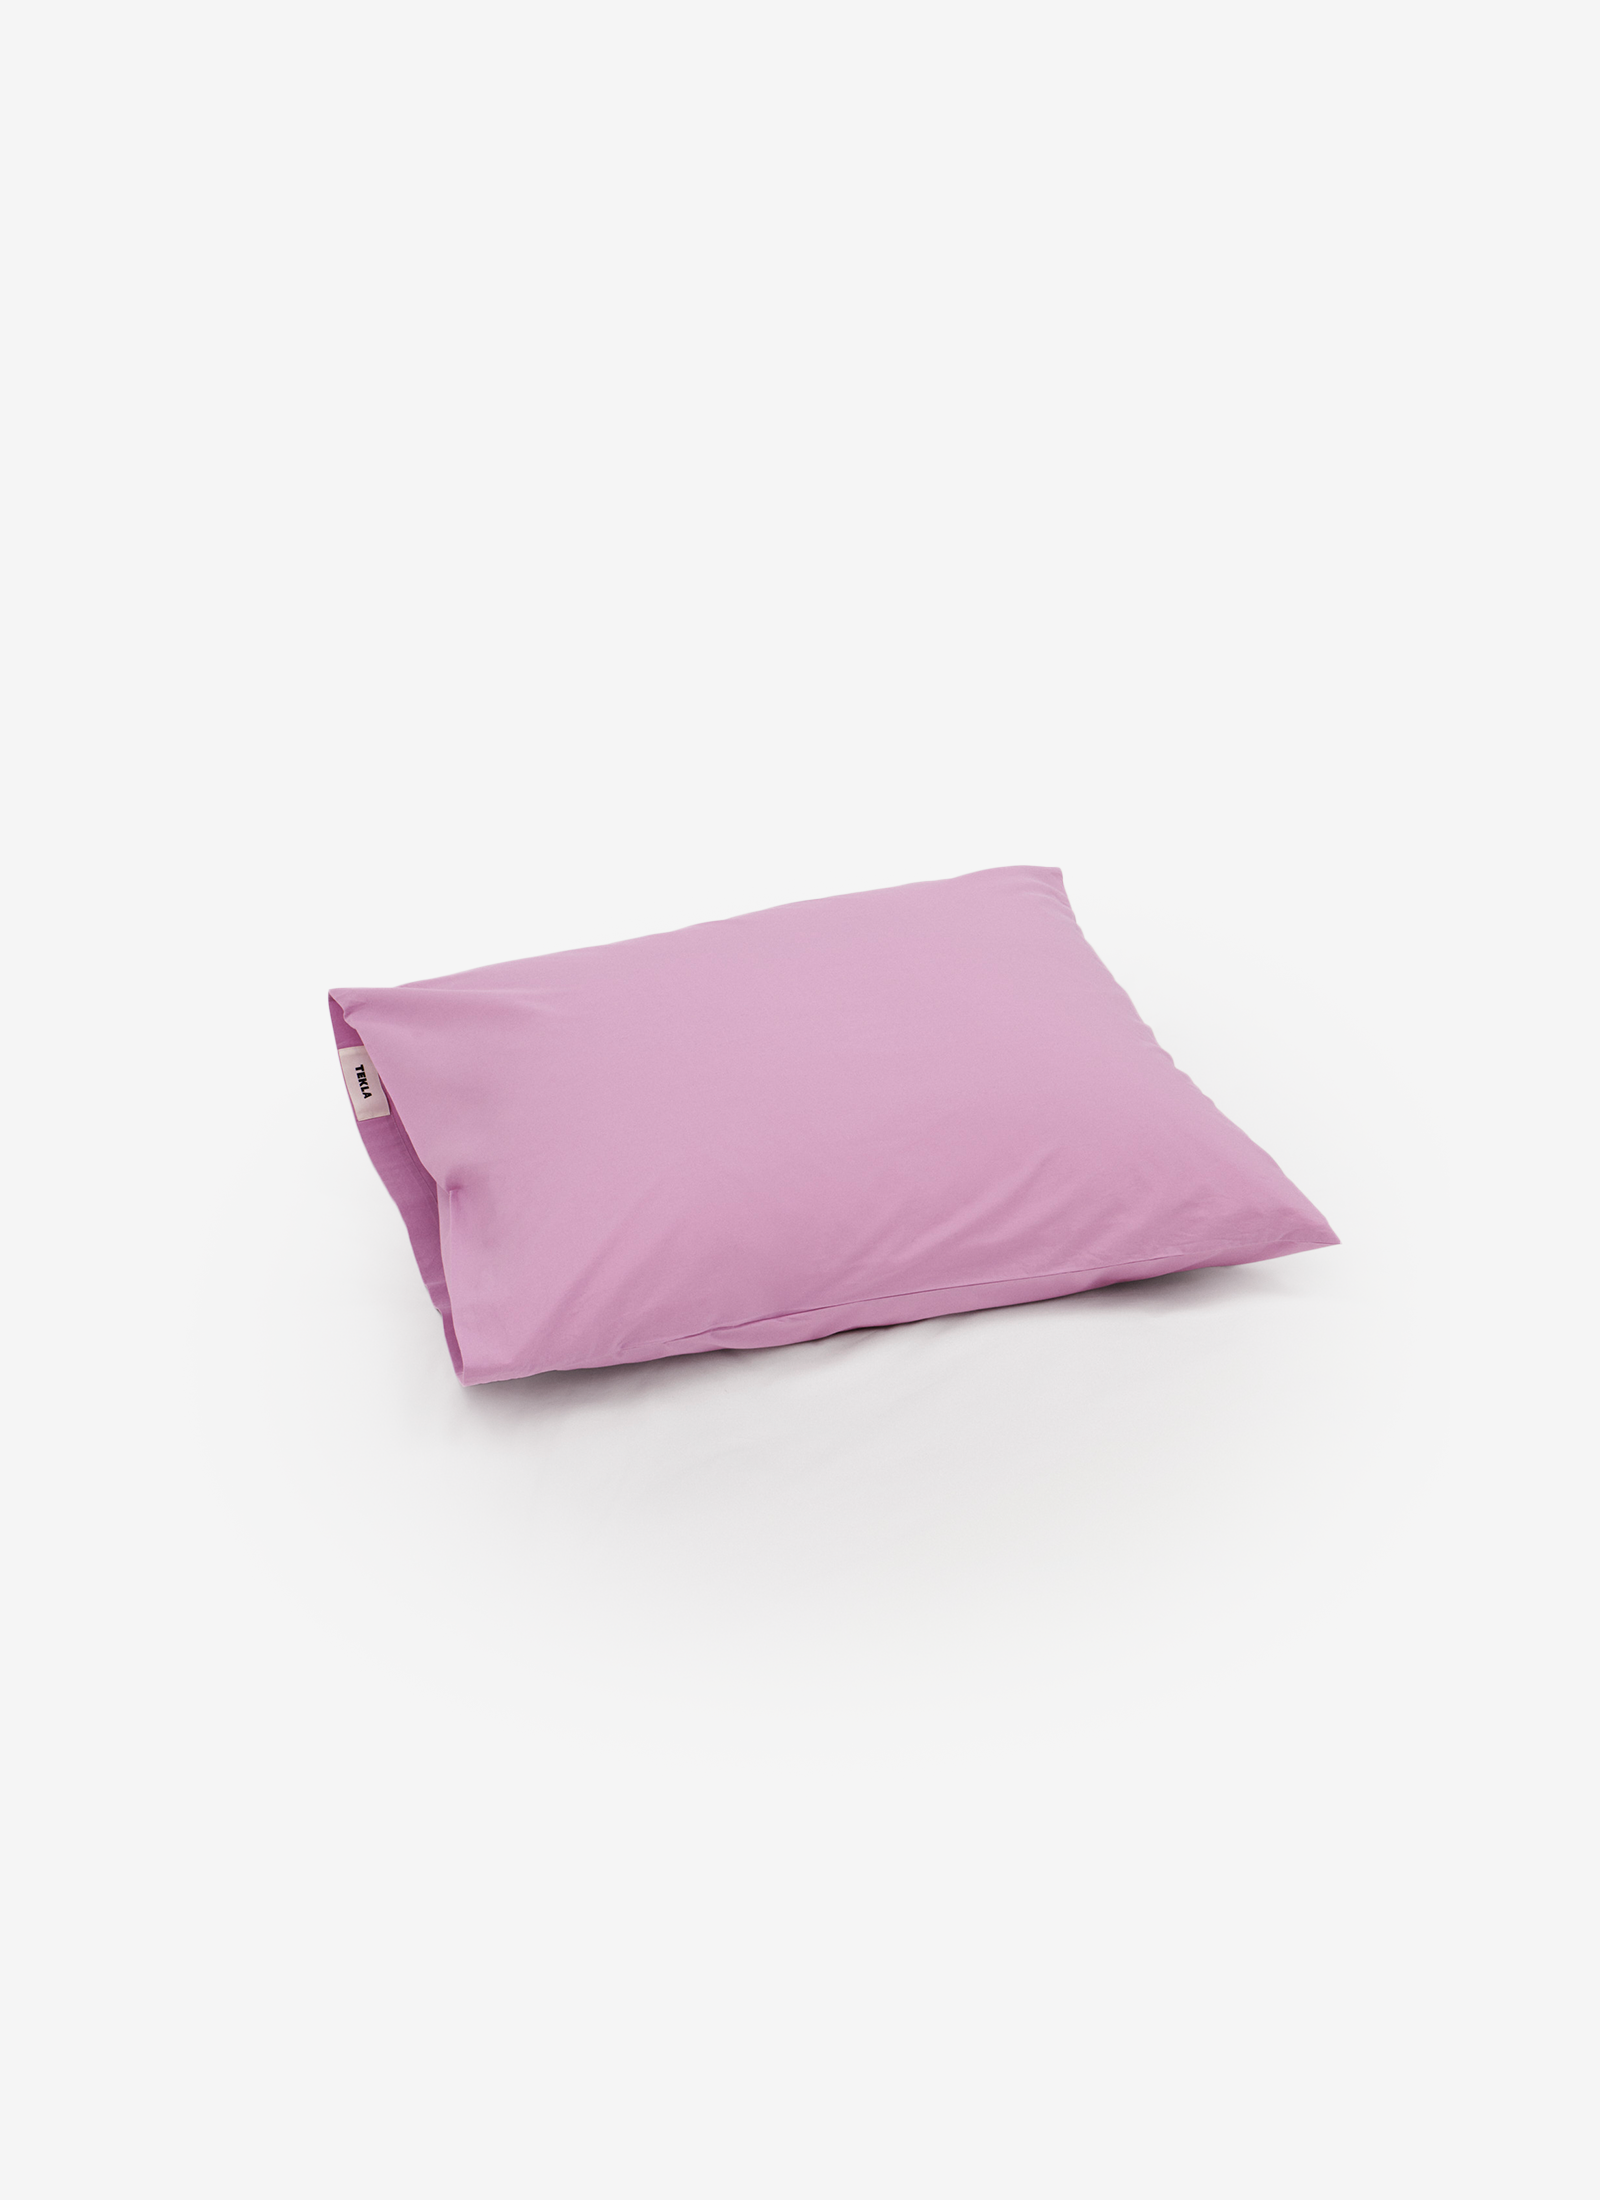 Pillowcases in Mallow Pink - Pair